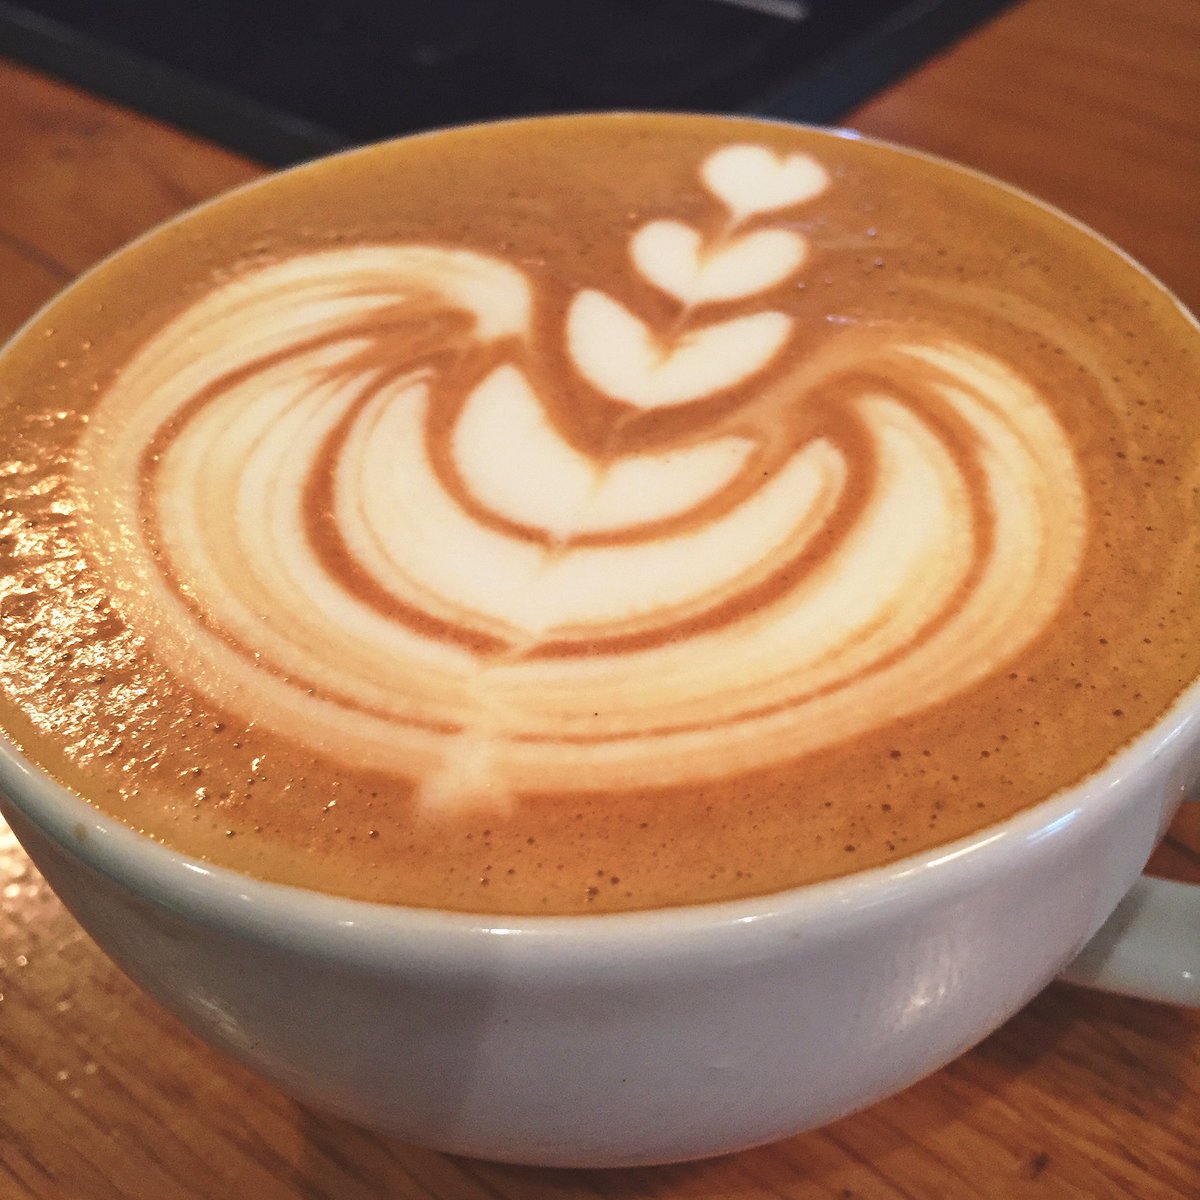 Put off the idea of a costa today? Yeah.. us too. Pop in for a #latte. We serve local @FandEcoffee and might even put a heart on top ;)